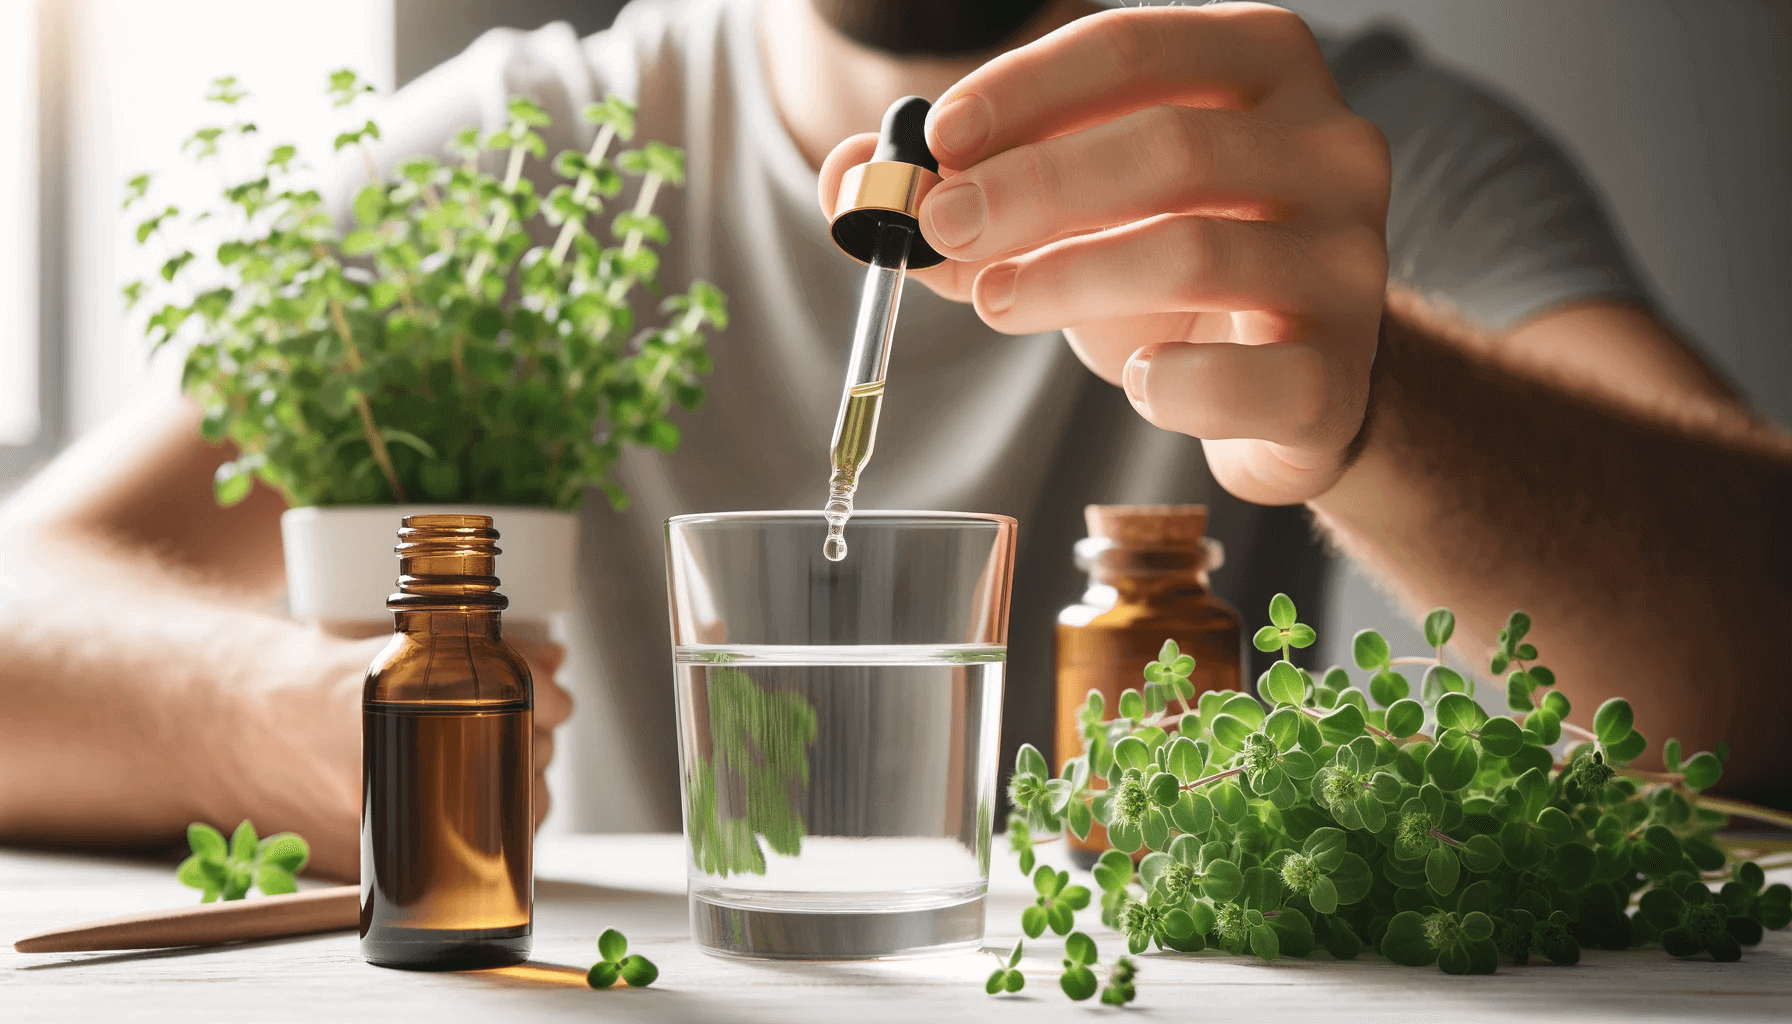 Oregano oil being dripped into a glass of water